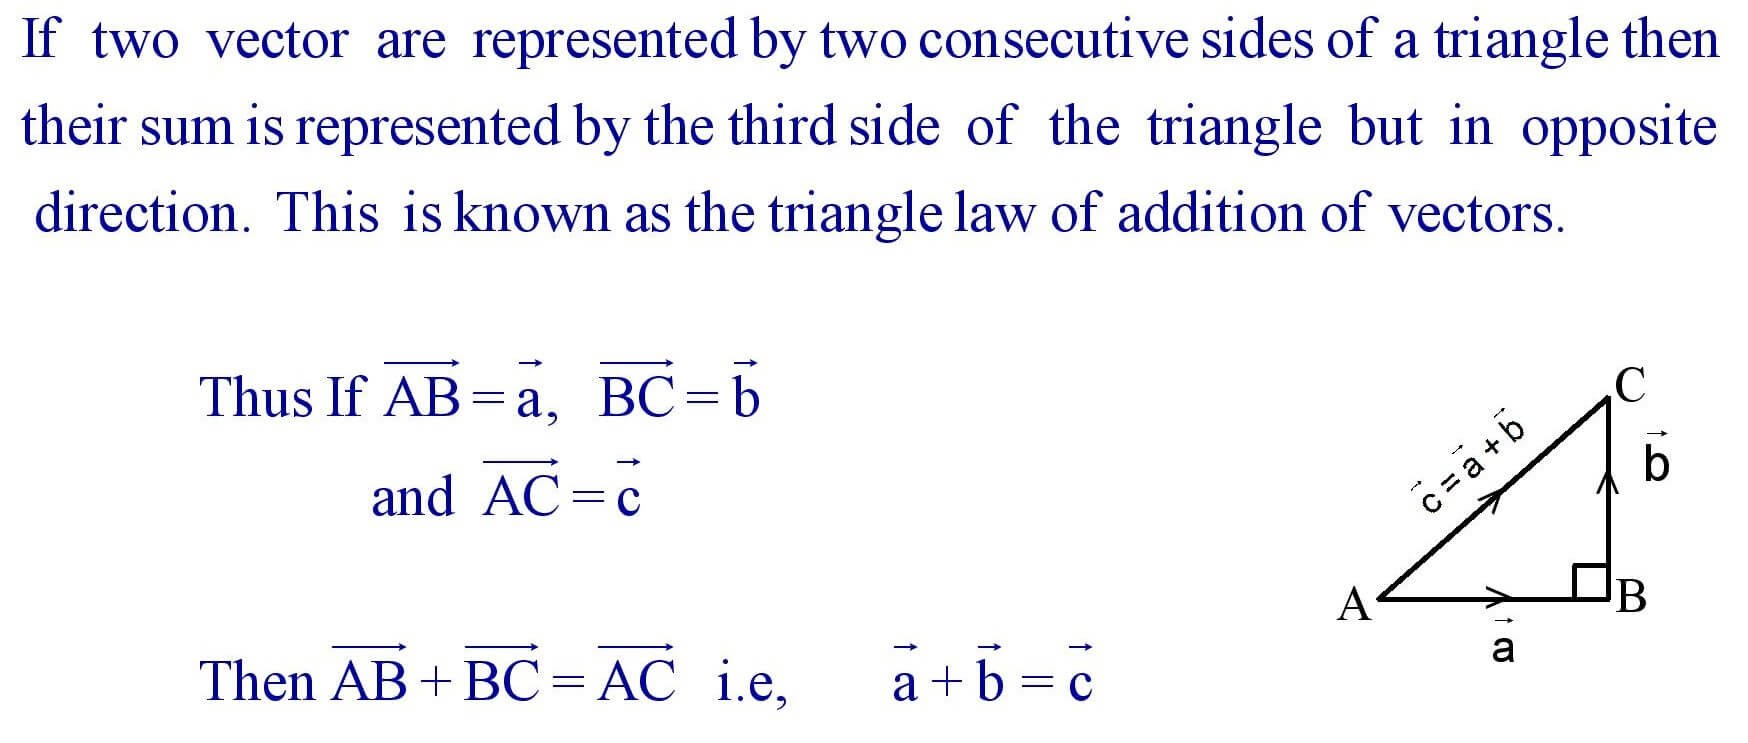 Triangle law of addition